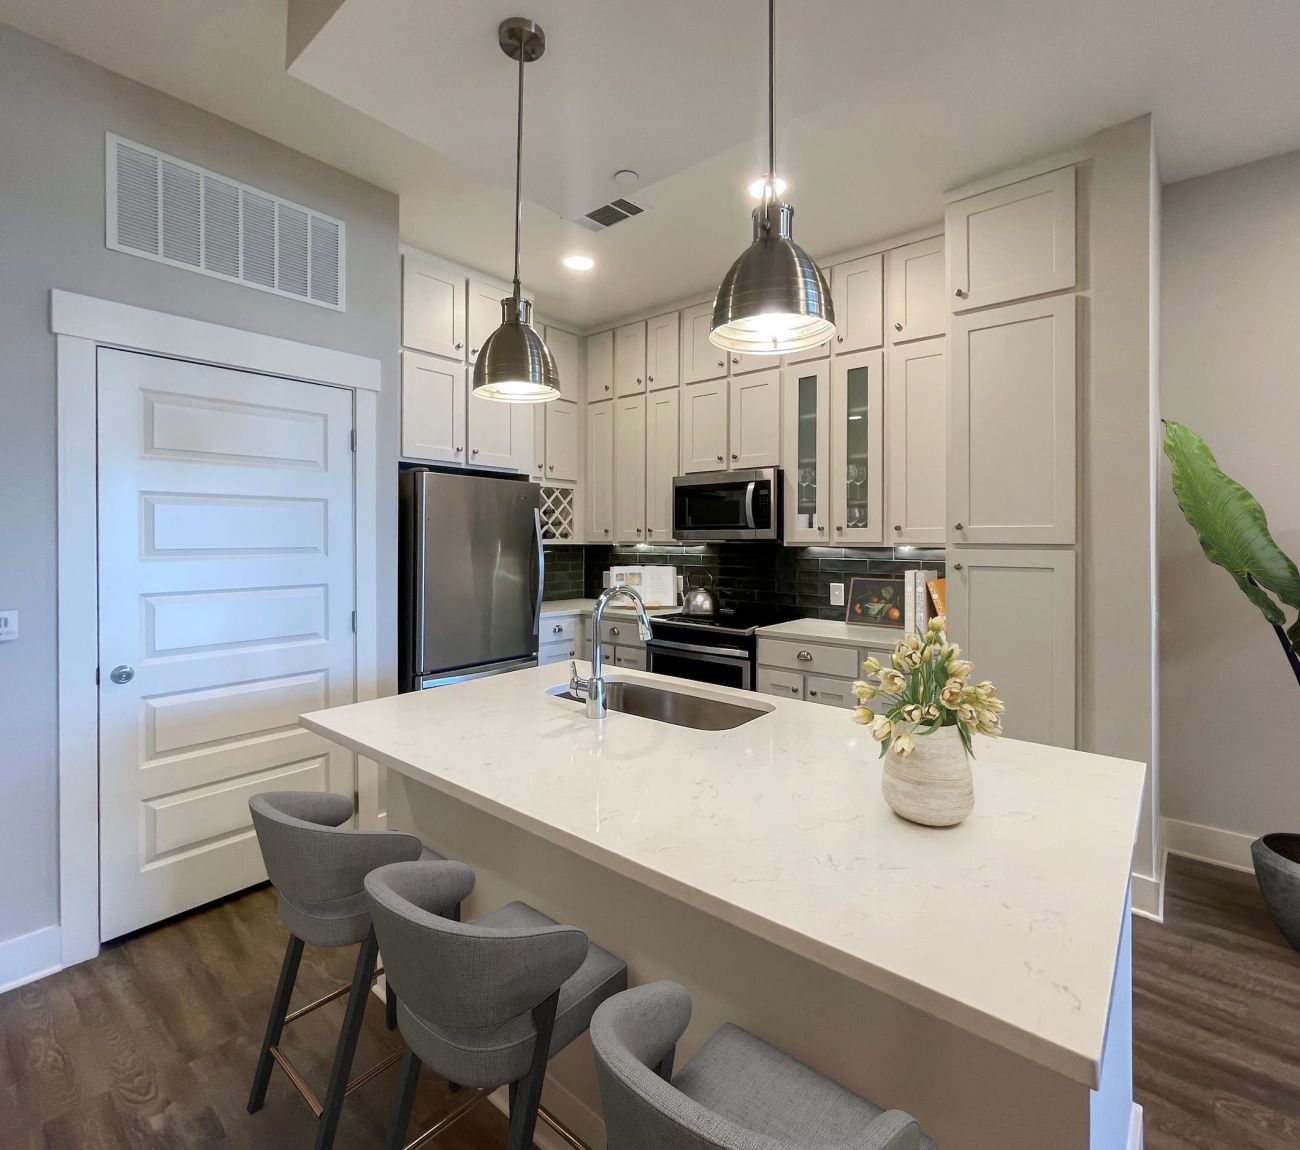 Luxury apartment kitchen with large kitchen island, deep sink, pendant lighting, and high-end finishes